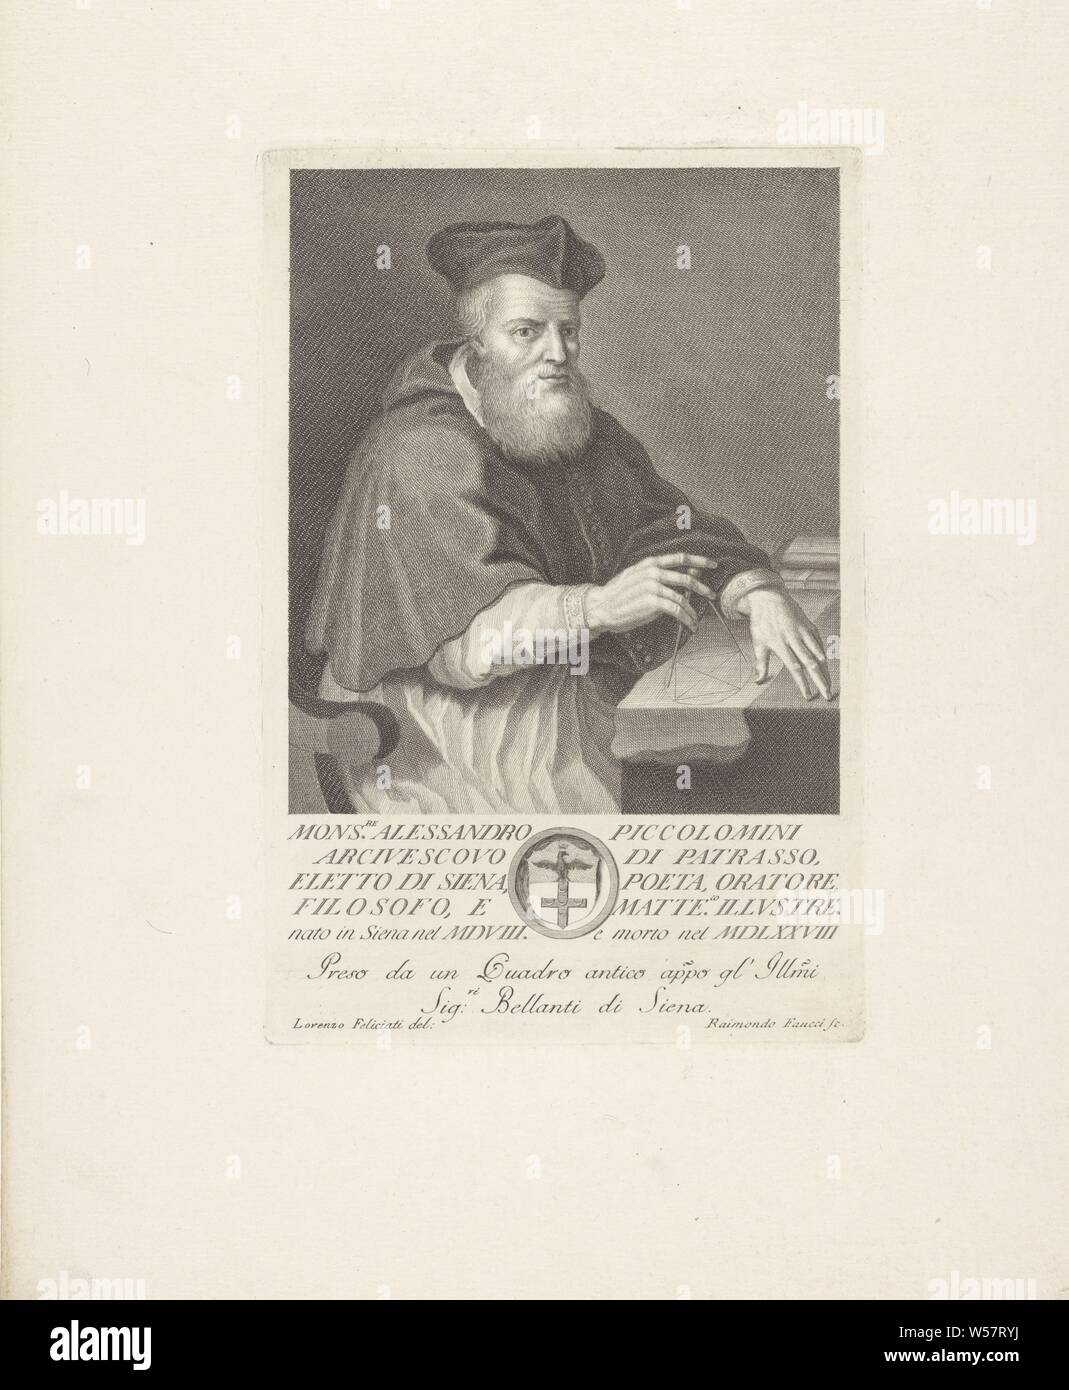 Portrait of Alessandro Piccolomini Portraits of famous Italians with a coat of arms in lower margin (series title), historical persons, Alessandro Piccolomini, Raimondo Faucci (mentioned on object), Italy, c. 1750 - c. 1800, paper, engraving, h 292 mm × w 195 mm Stock Photo